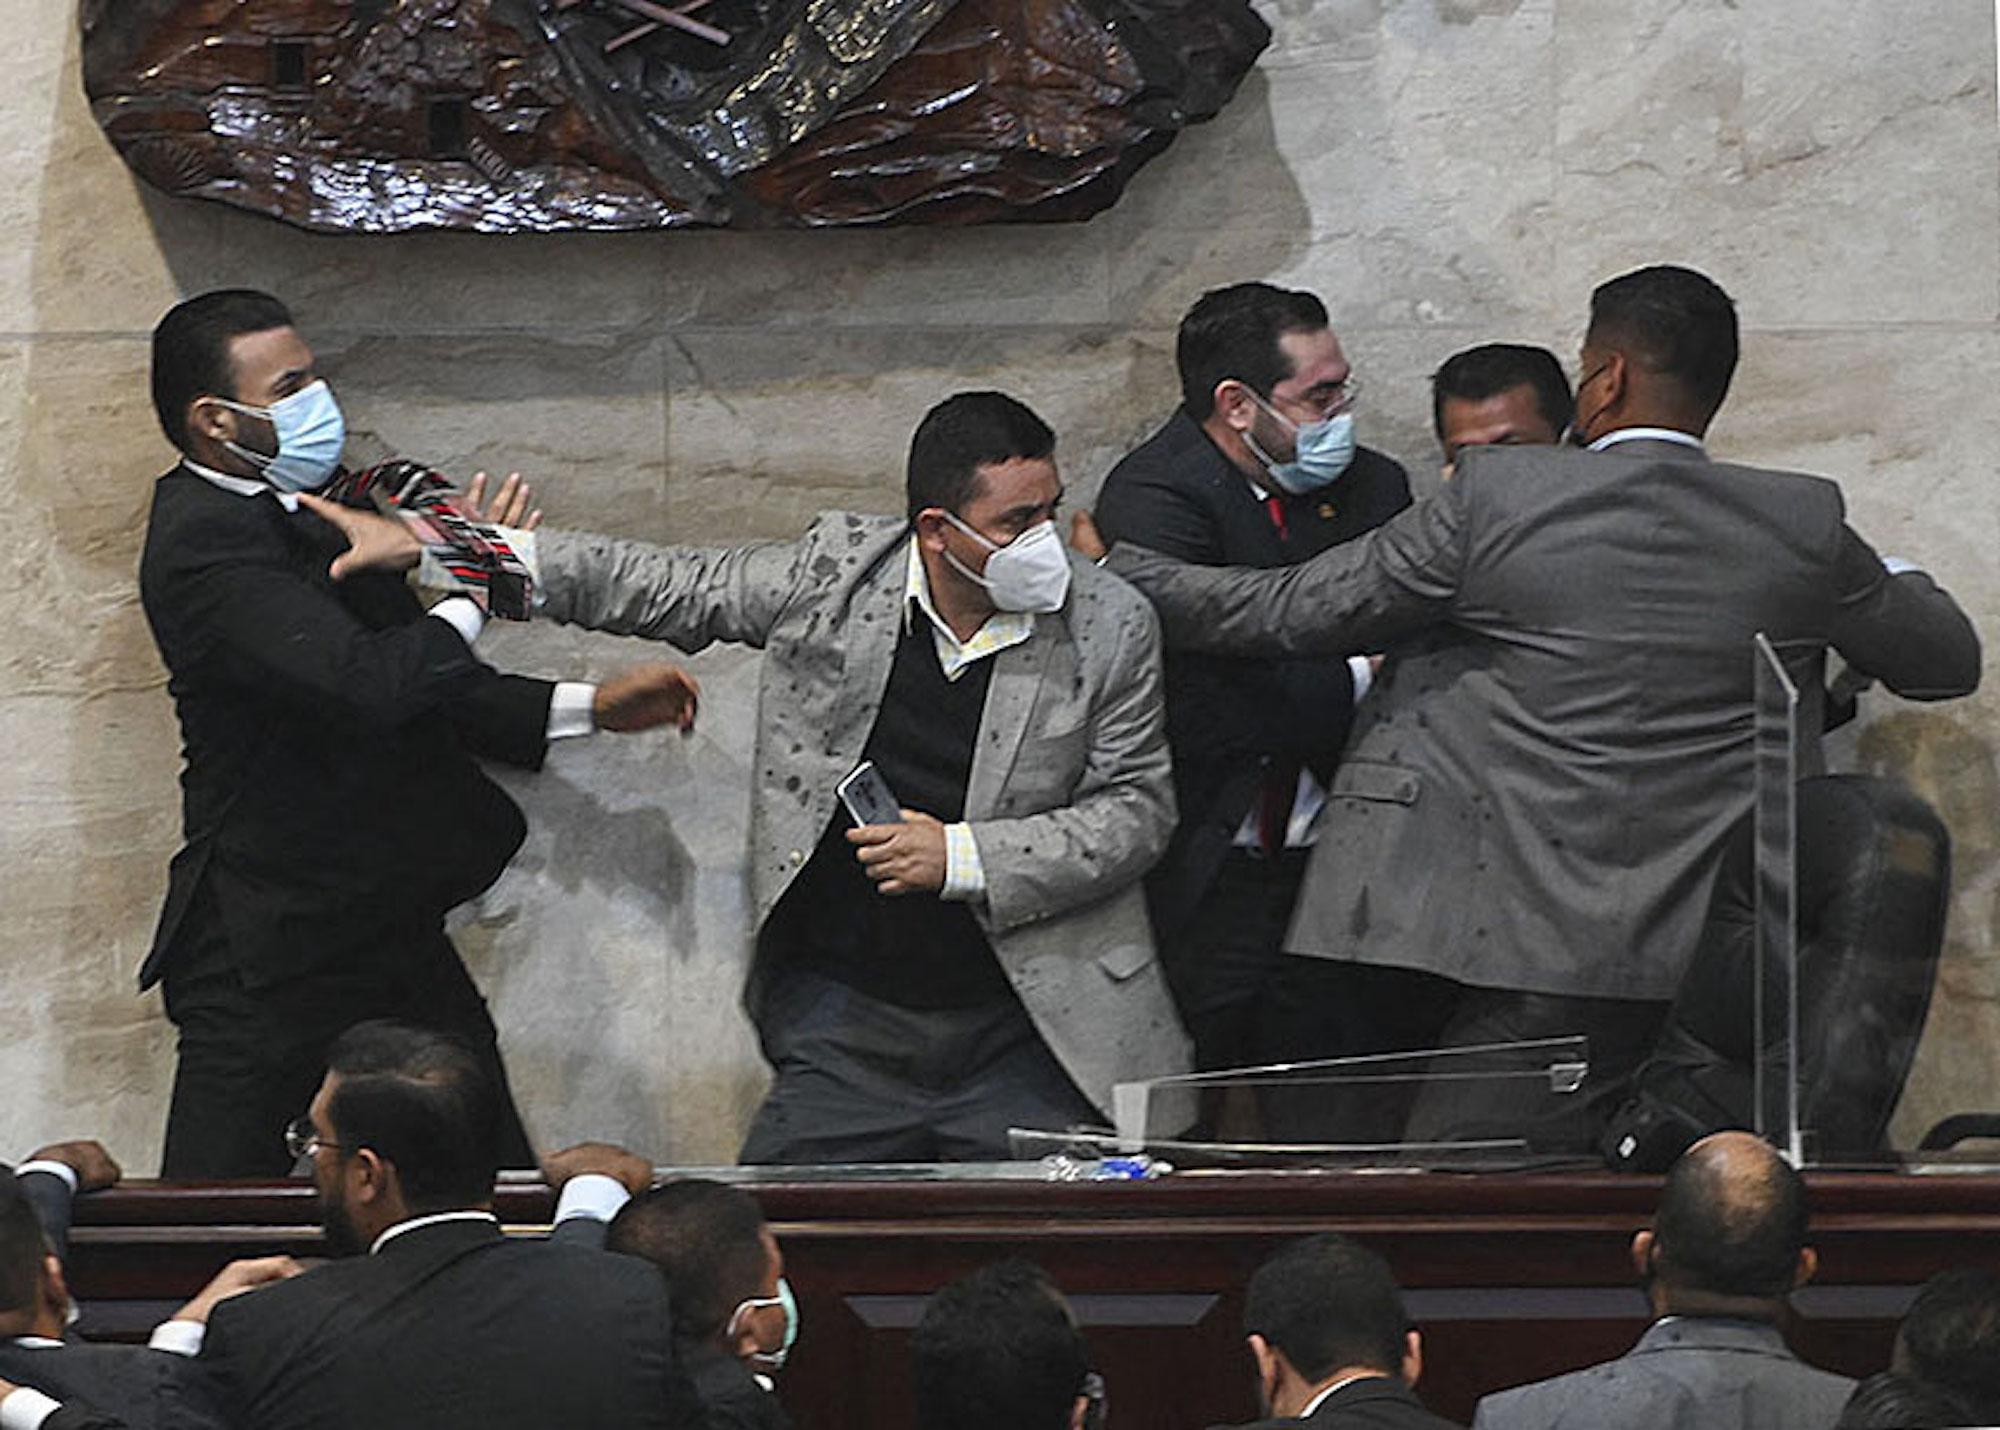 Deputy for the Libertad y Refundacion (LIBRE) party Rassel Tome (L) tries to assault deputy Jorge Calix (2-R) after his election as President of the Provisional Board of Directors of the National Congress, at the Legislative headquarters in Tegucigalpa, on January 21, 2022. Photo: Orlando Sierra/AFP